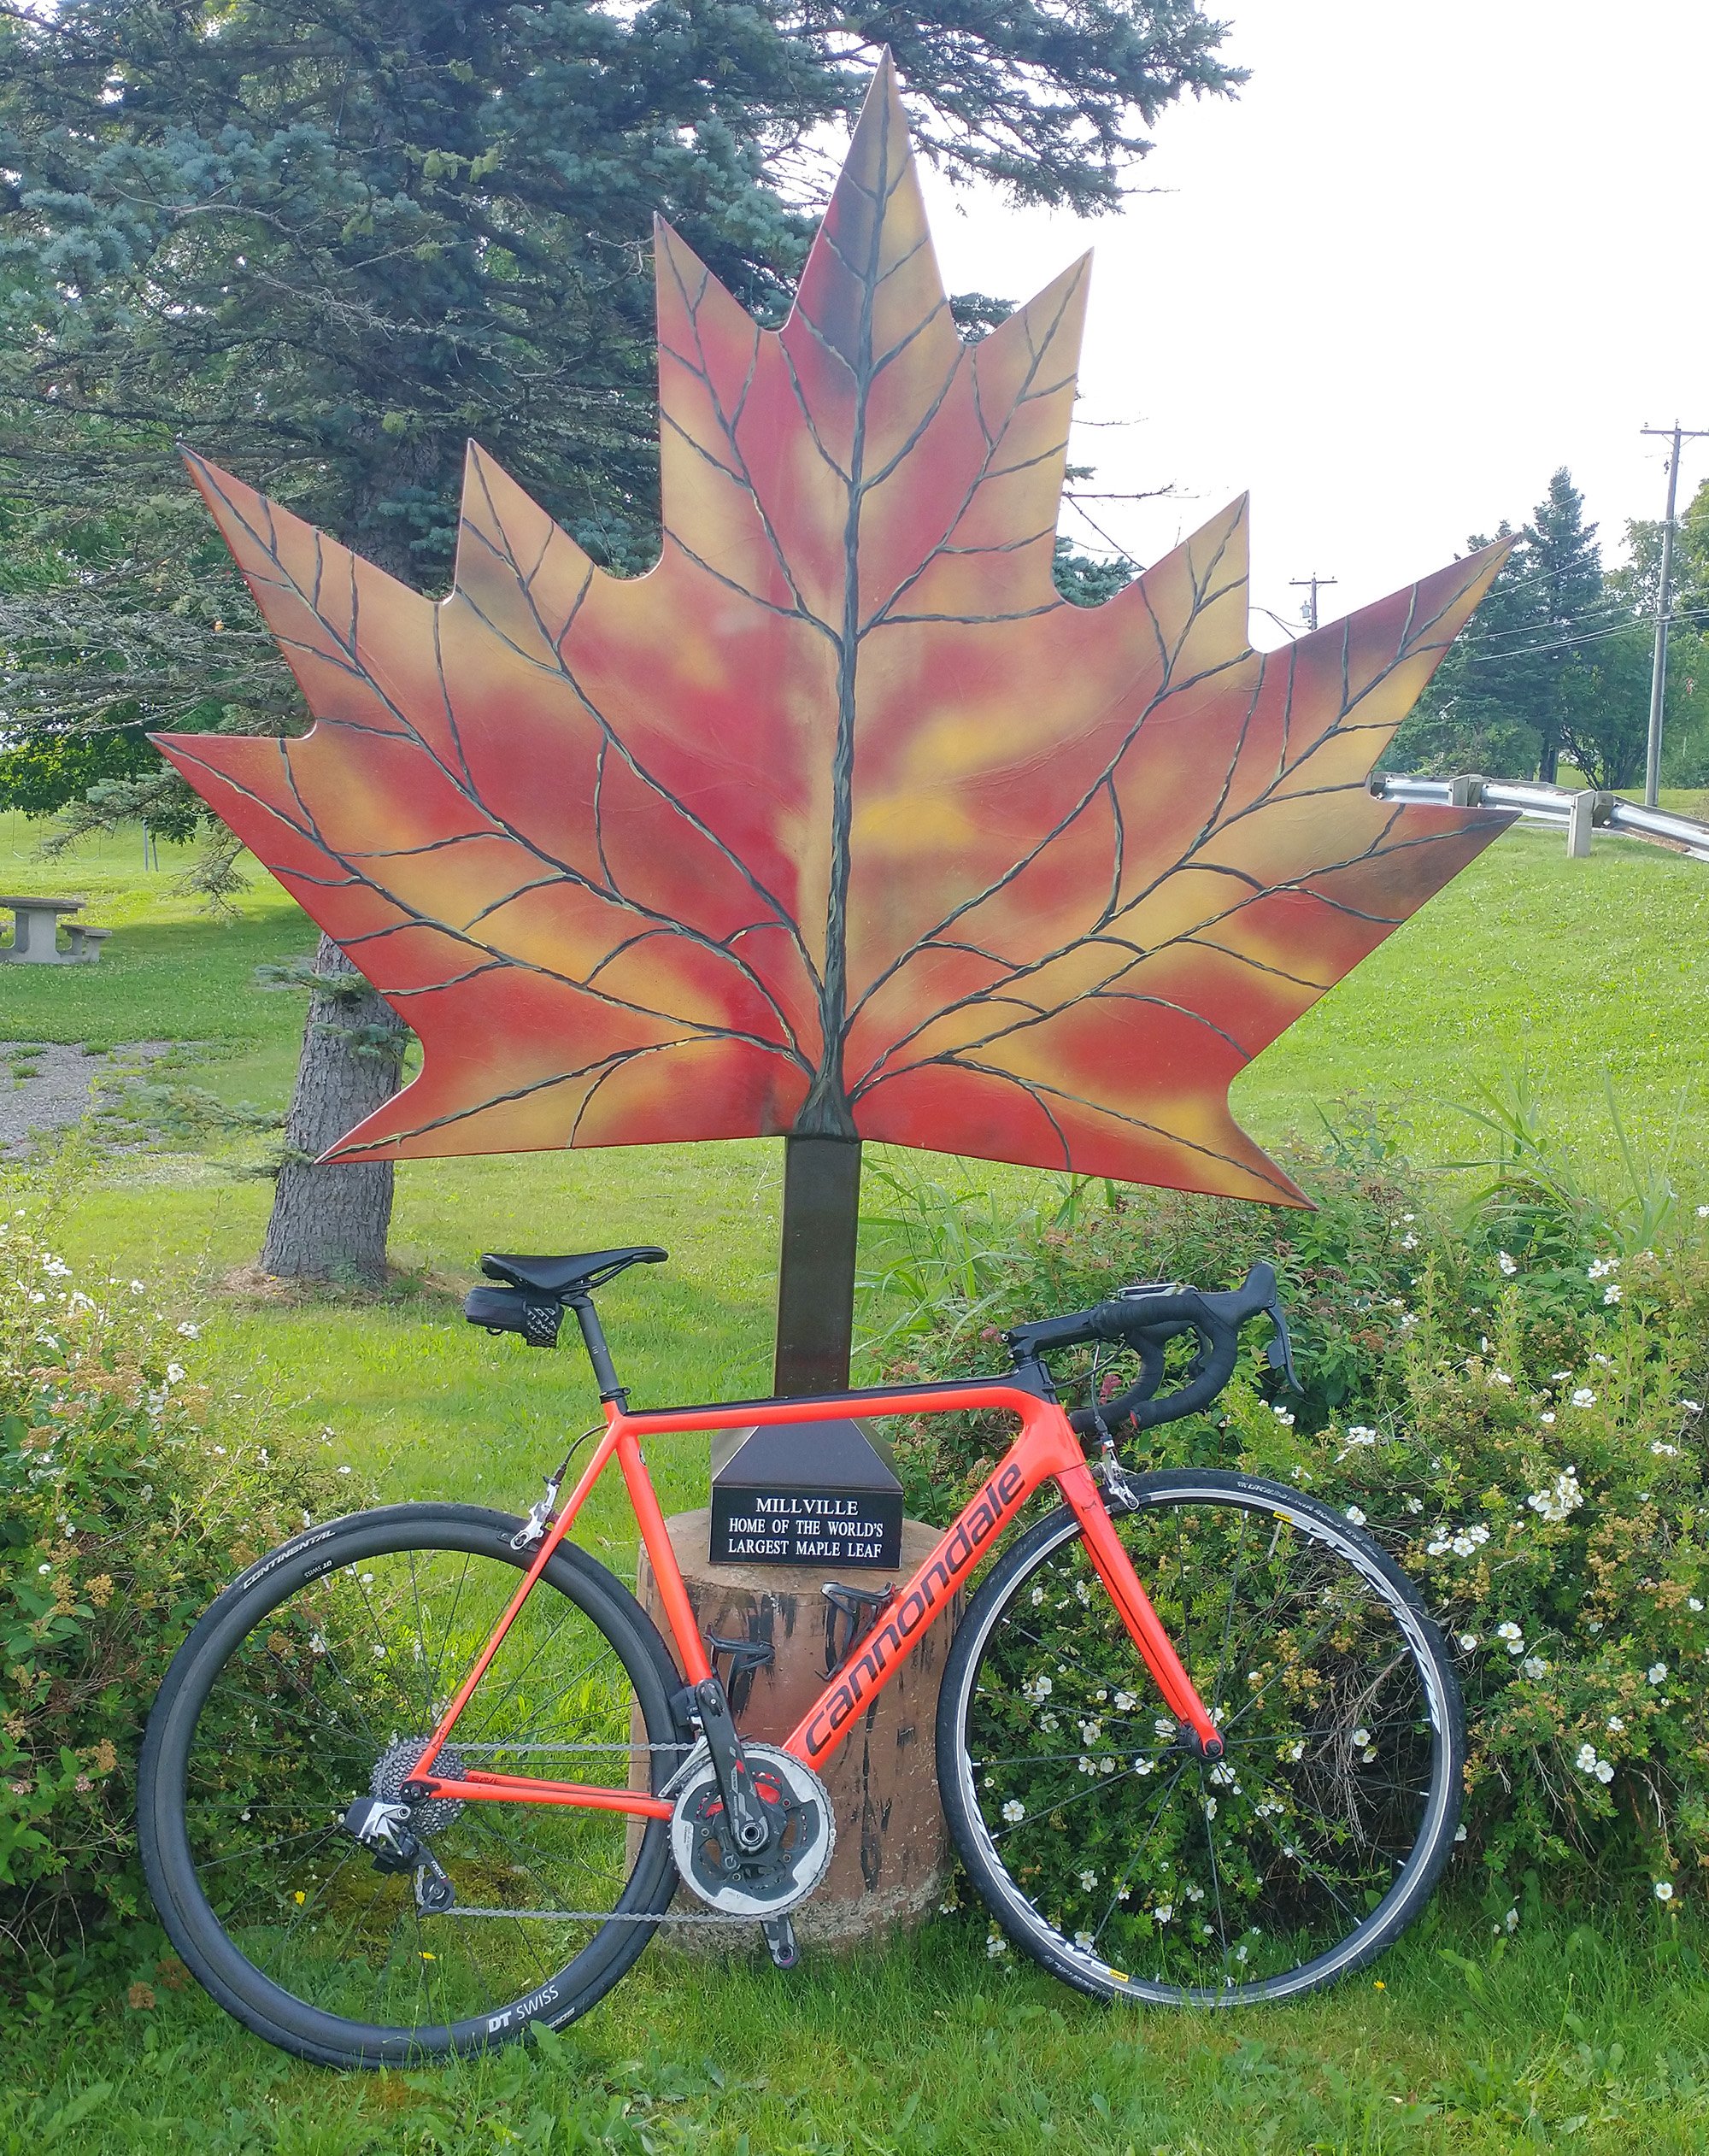 Well there you go, that's the biggest Maple Leaf in the world. I missed it while passing by the first time. Scammed.